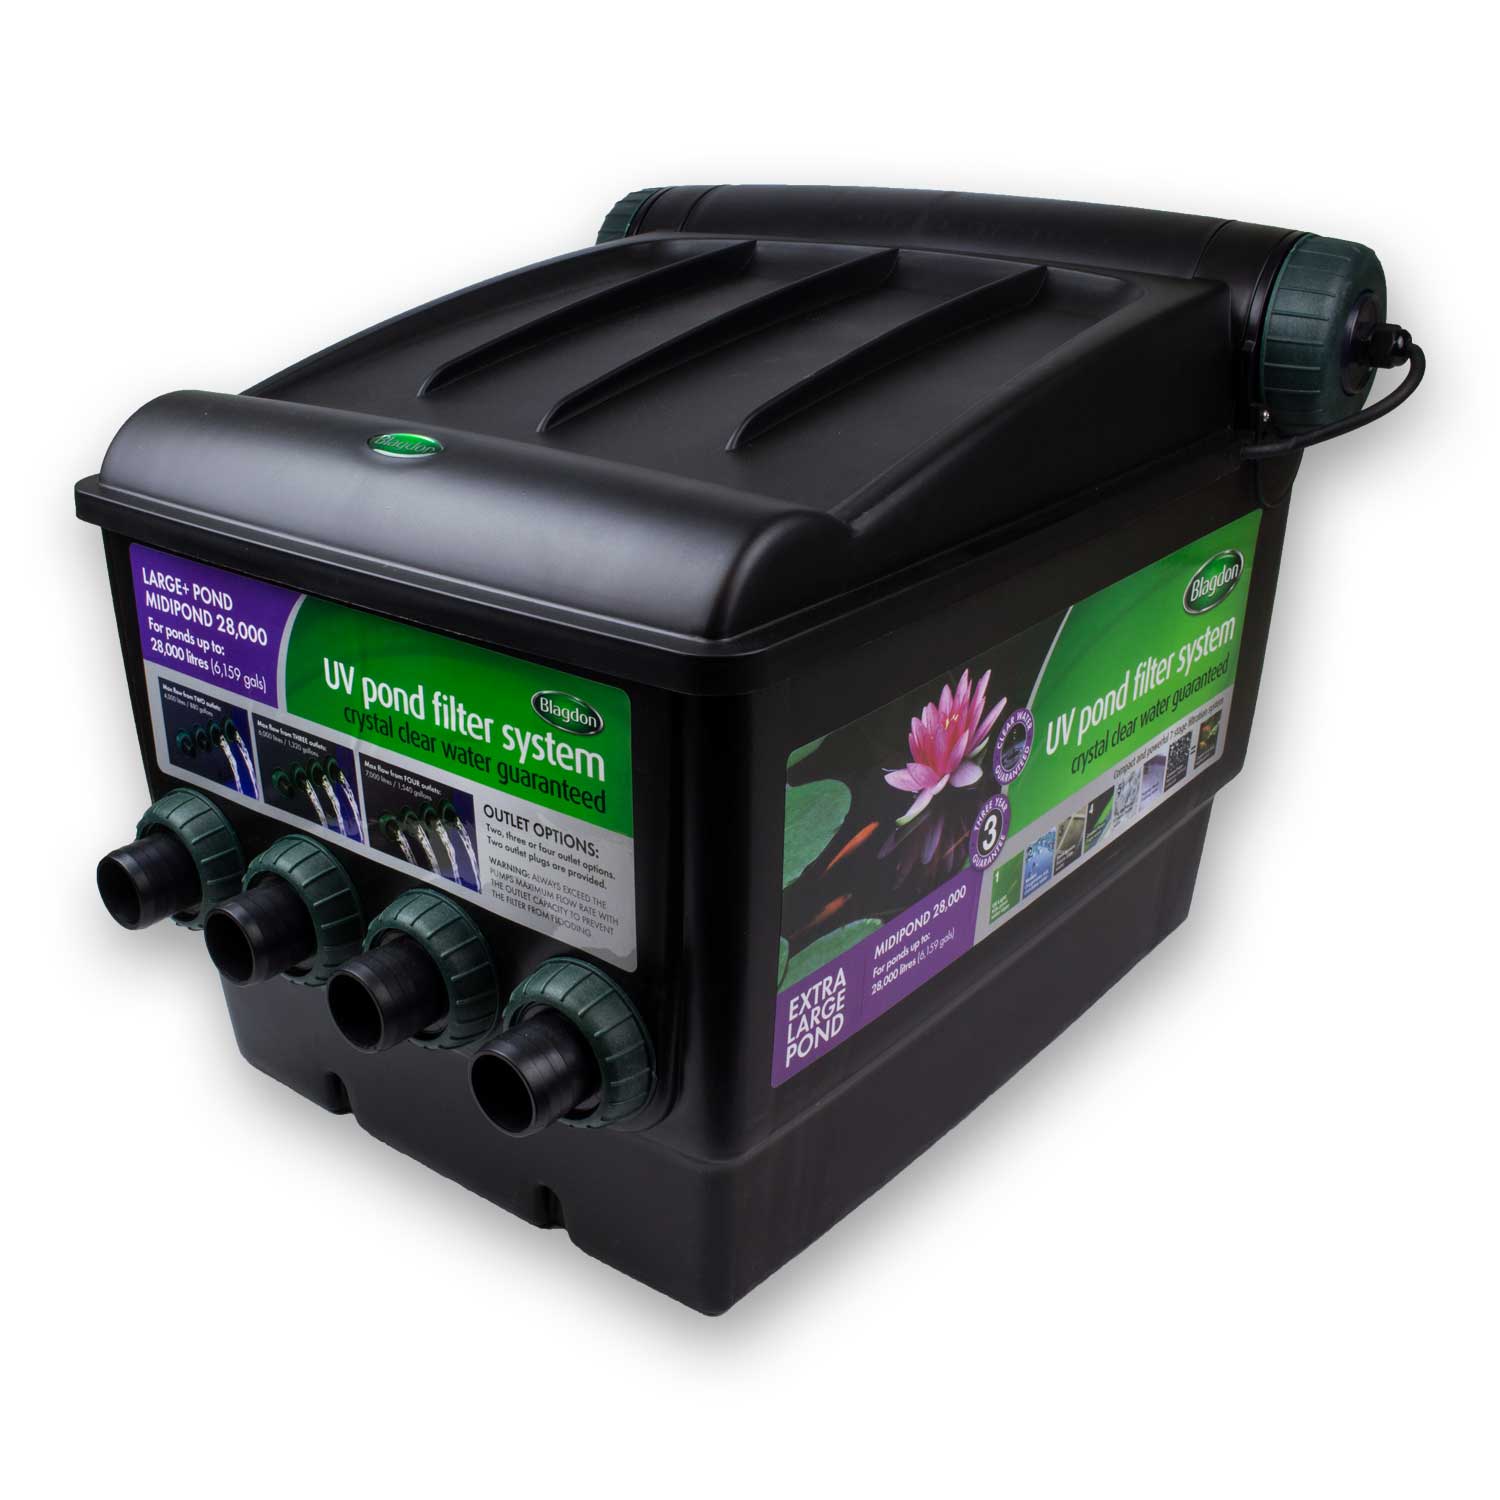 Details about   Blagdon MiniPond MidiPond Filters with UVC Clarifier Pond Filtration Fish Koi 